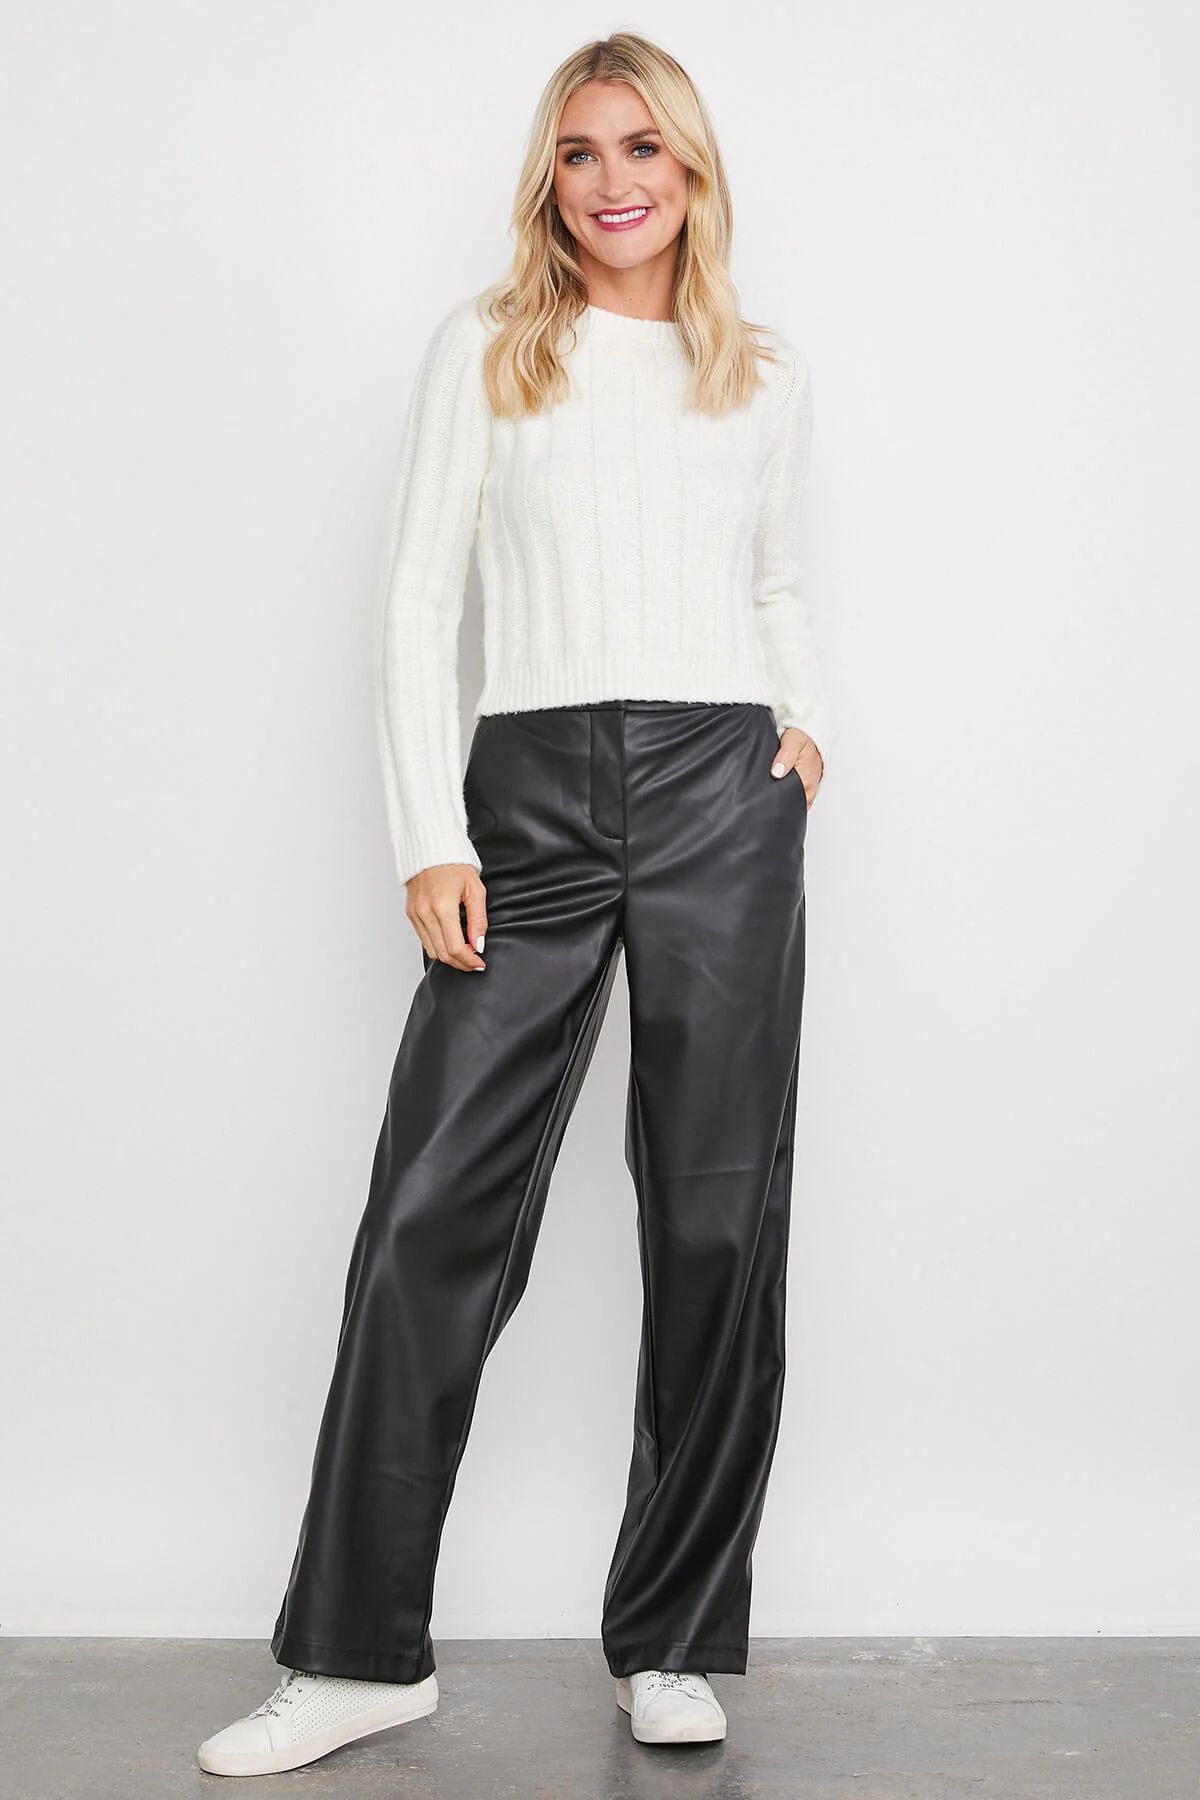 RD Style Black Vegan Leather Flat Front Trousers | Social Threads